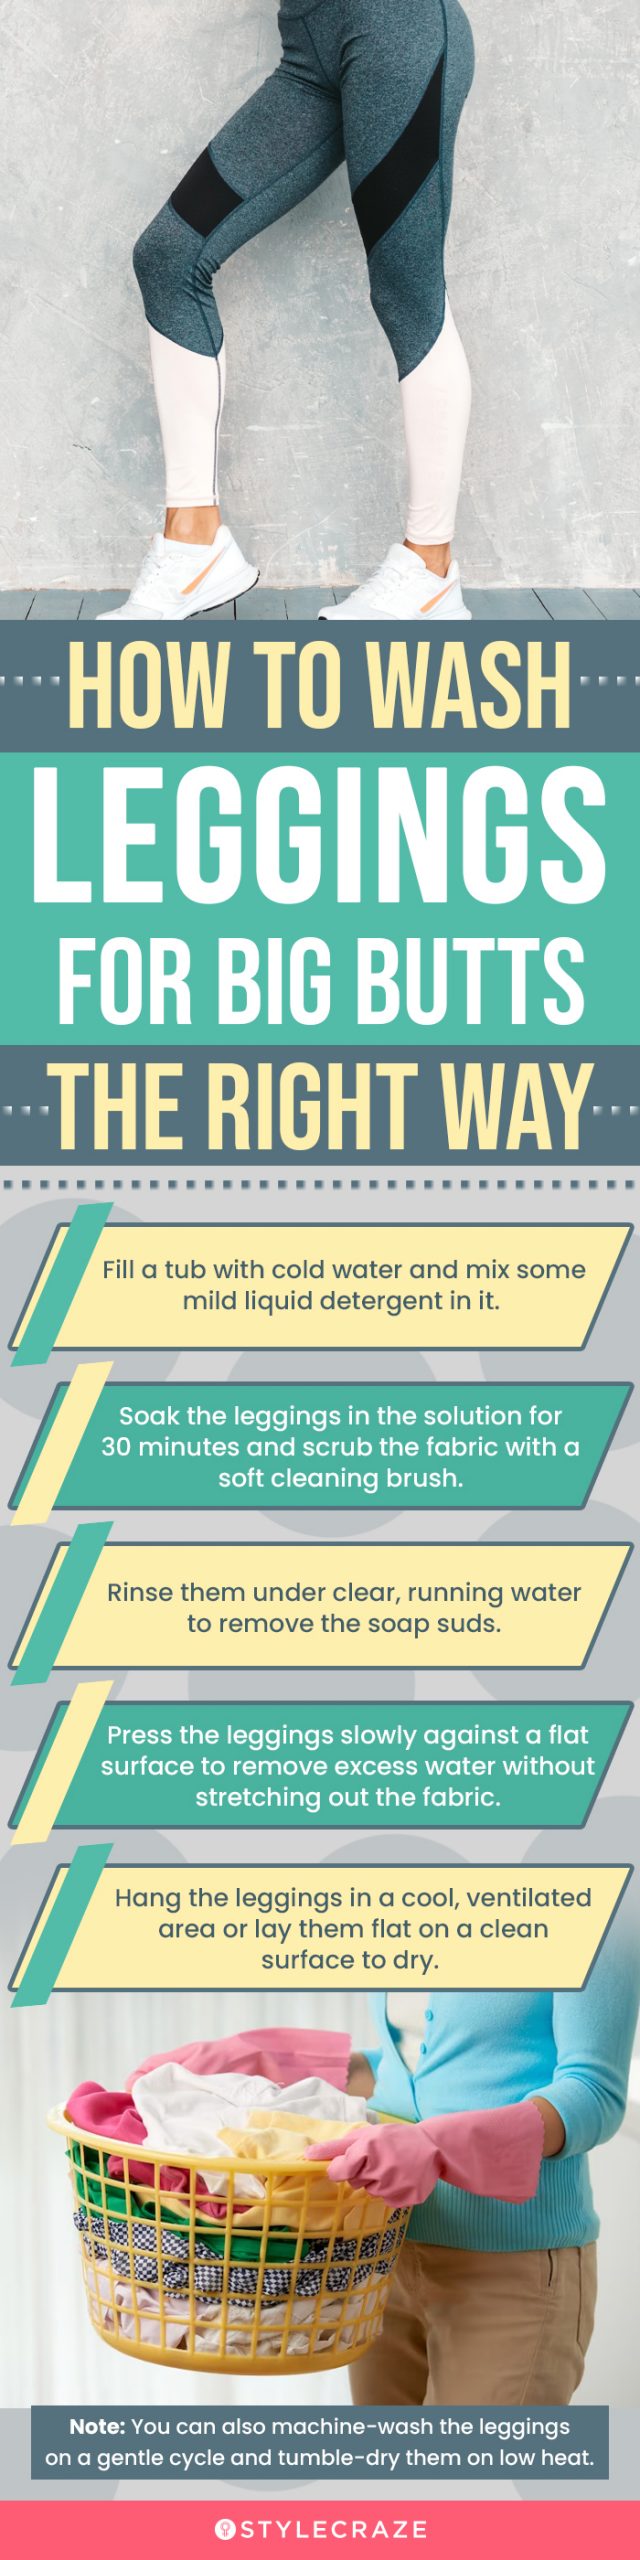 How To Wash Leggings For Big Butts The Right Way (infographic)